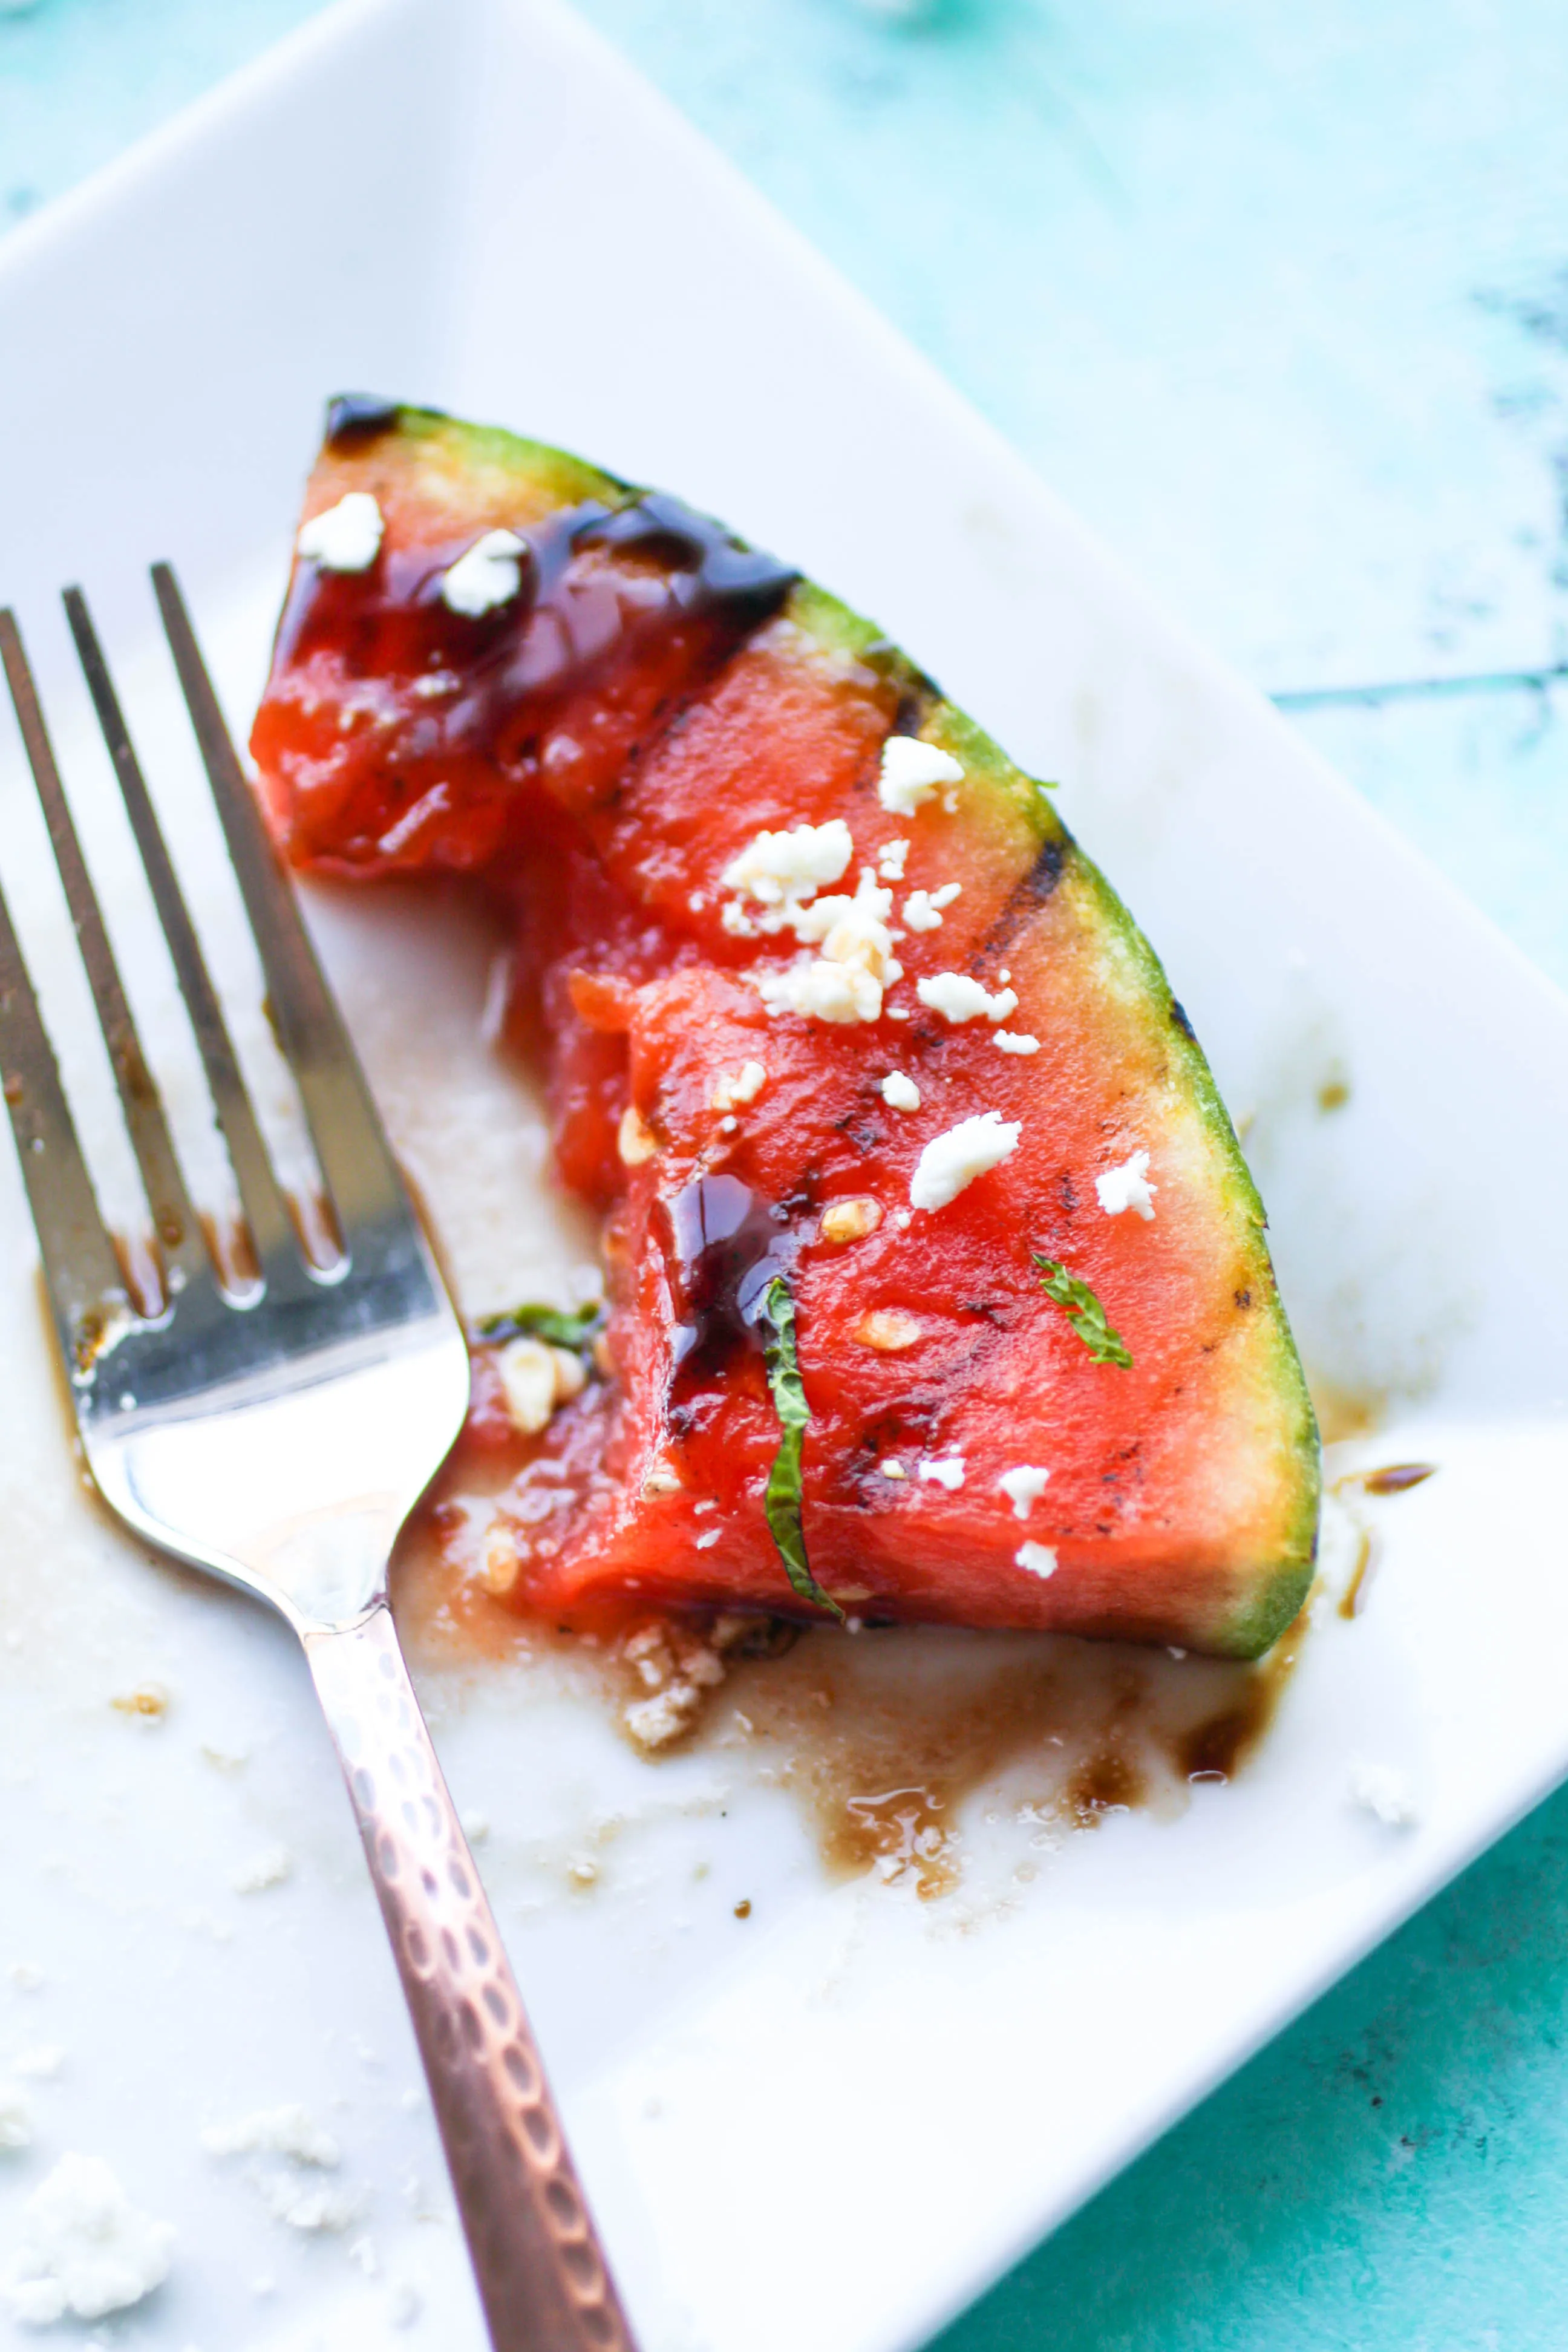 Grilled Watermelon with Feta, Mint, and Balsamic Glaze is a fresh way to start your next summer meal. Grilled Watermelon with Feta, Mint, and Balsamic Glaze is so easy to put together, and perfect for a summer get together!